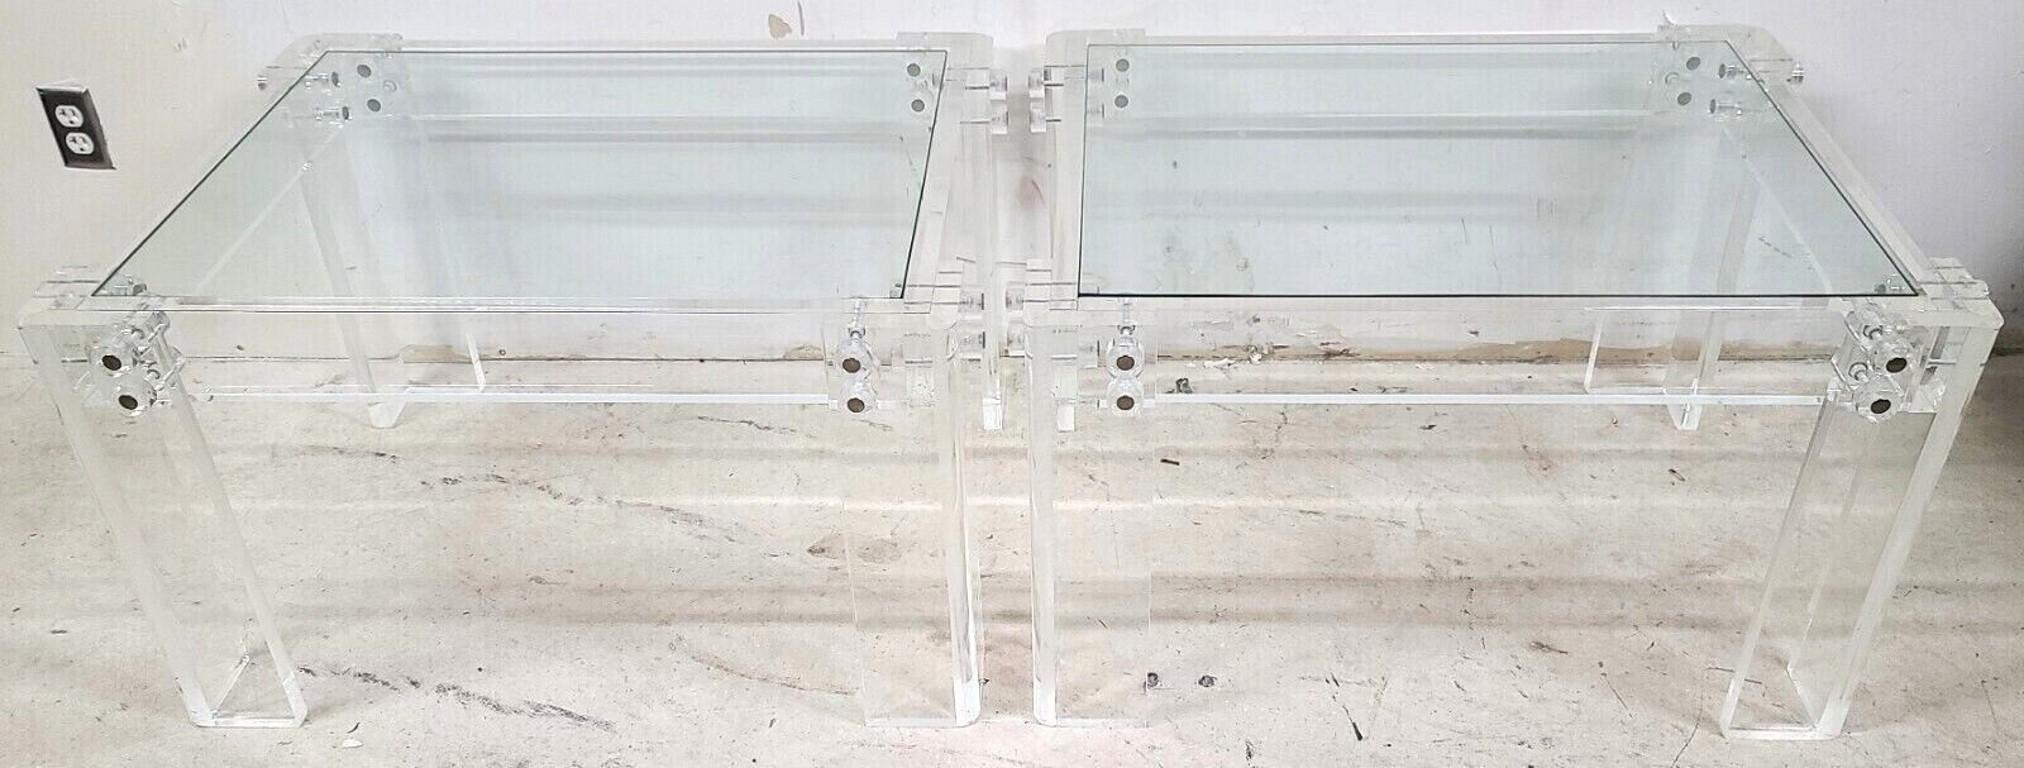 Offering One Of Our Recent Palm Beach Estate Fine Furniture Acquisitions Of A
Oversized 1970s Vintage MCM Lucite Glass Side End Tables

Approximate Measurements in Inches
20